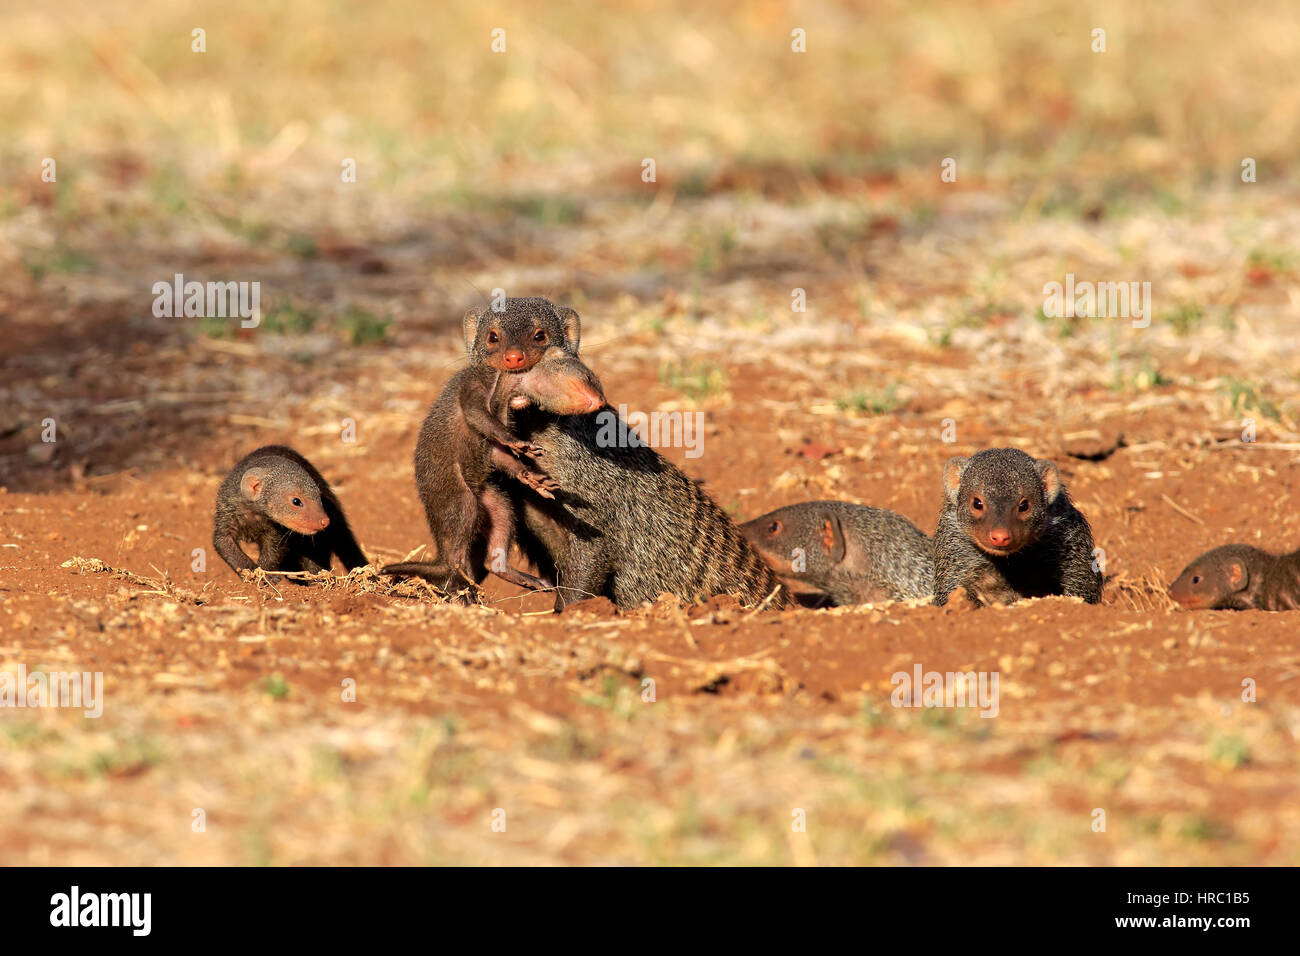 Banded mongoose, (Mungos mungo), mother with young bites to carry, neckbite, Kruger Nationalpark, South Africa, Africa Stock Photo